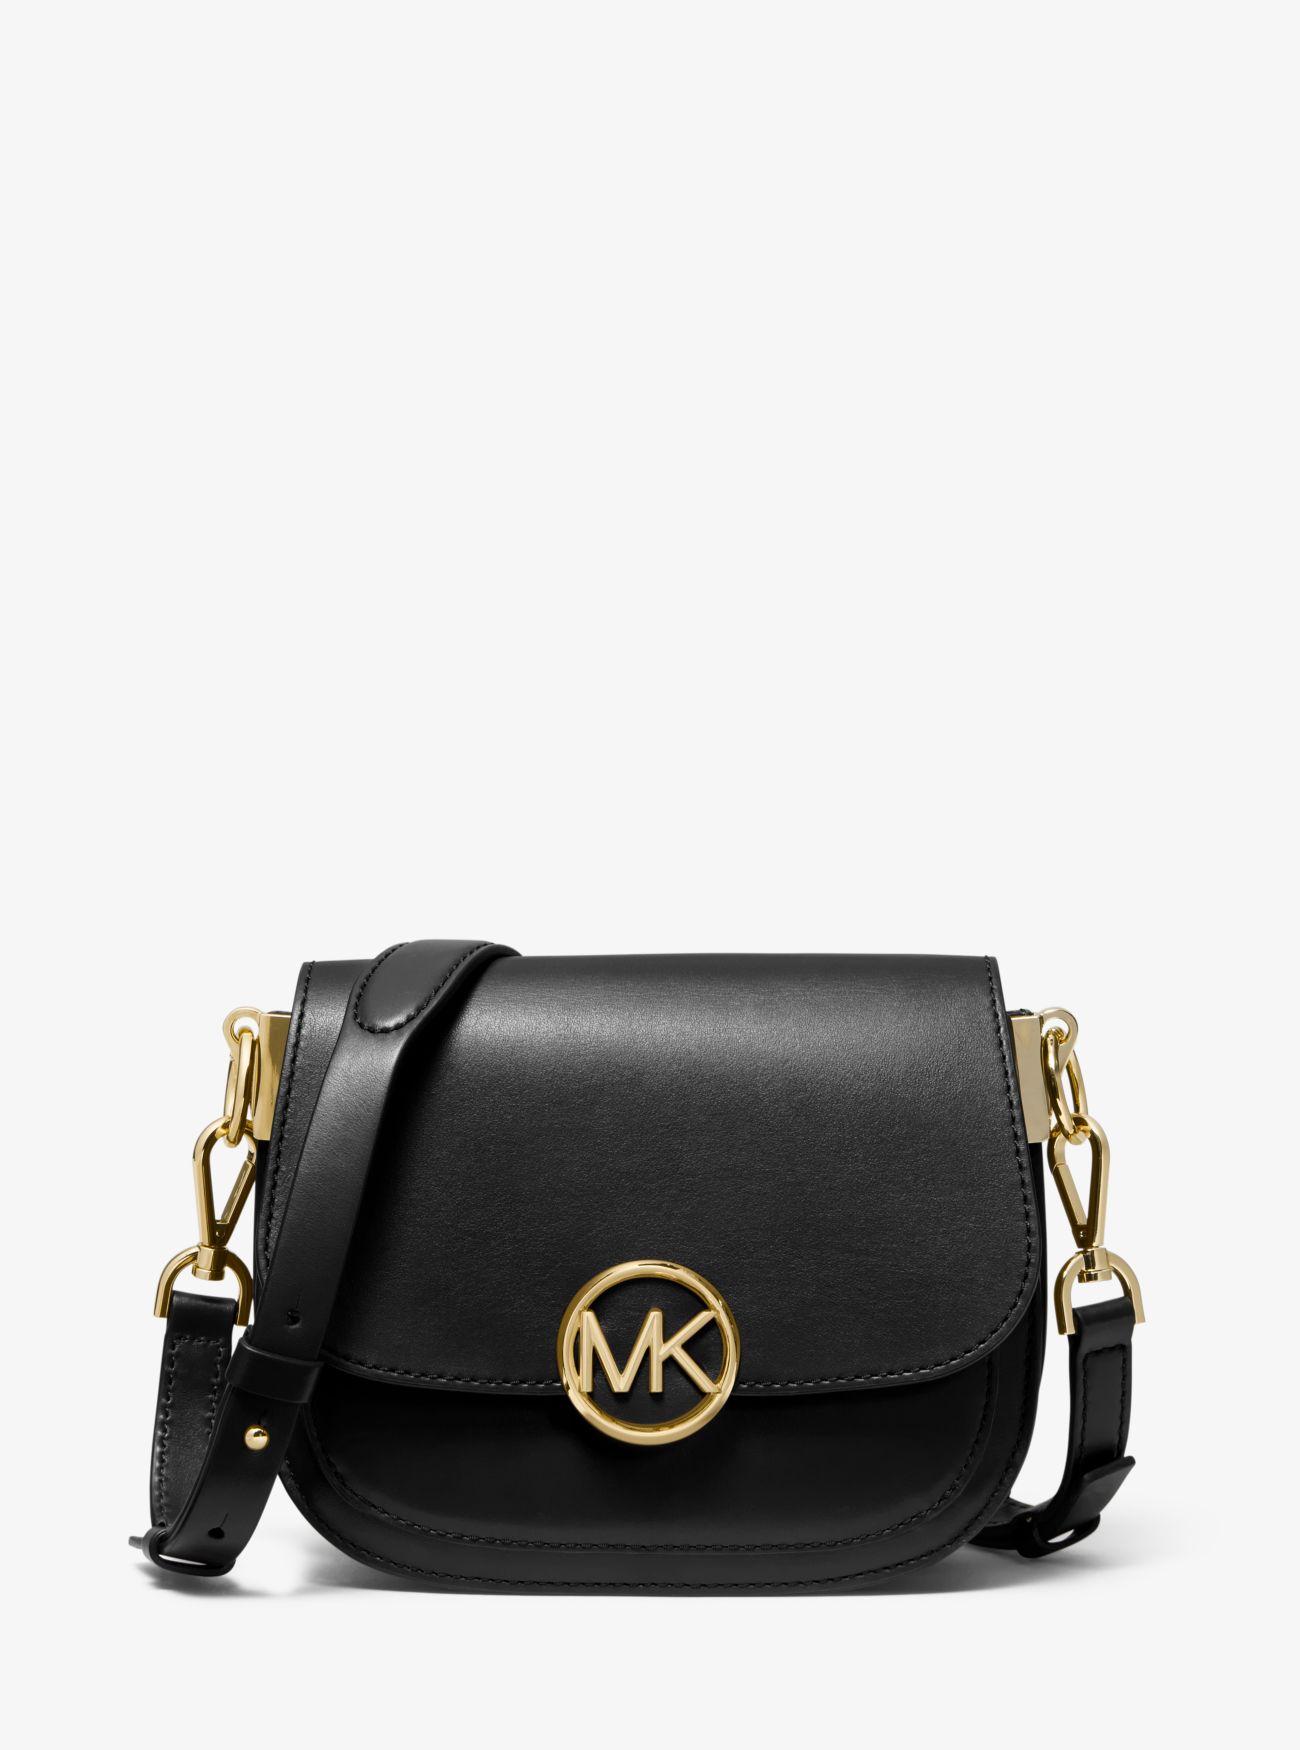 Michael Kors Lillie Small Leather Saddle Bag in Black - Lyst